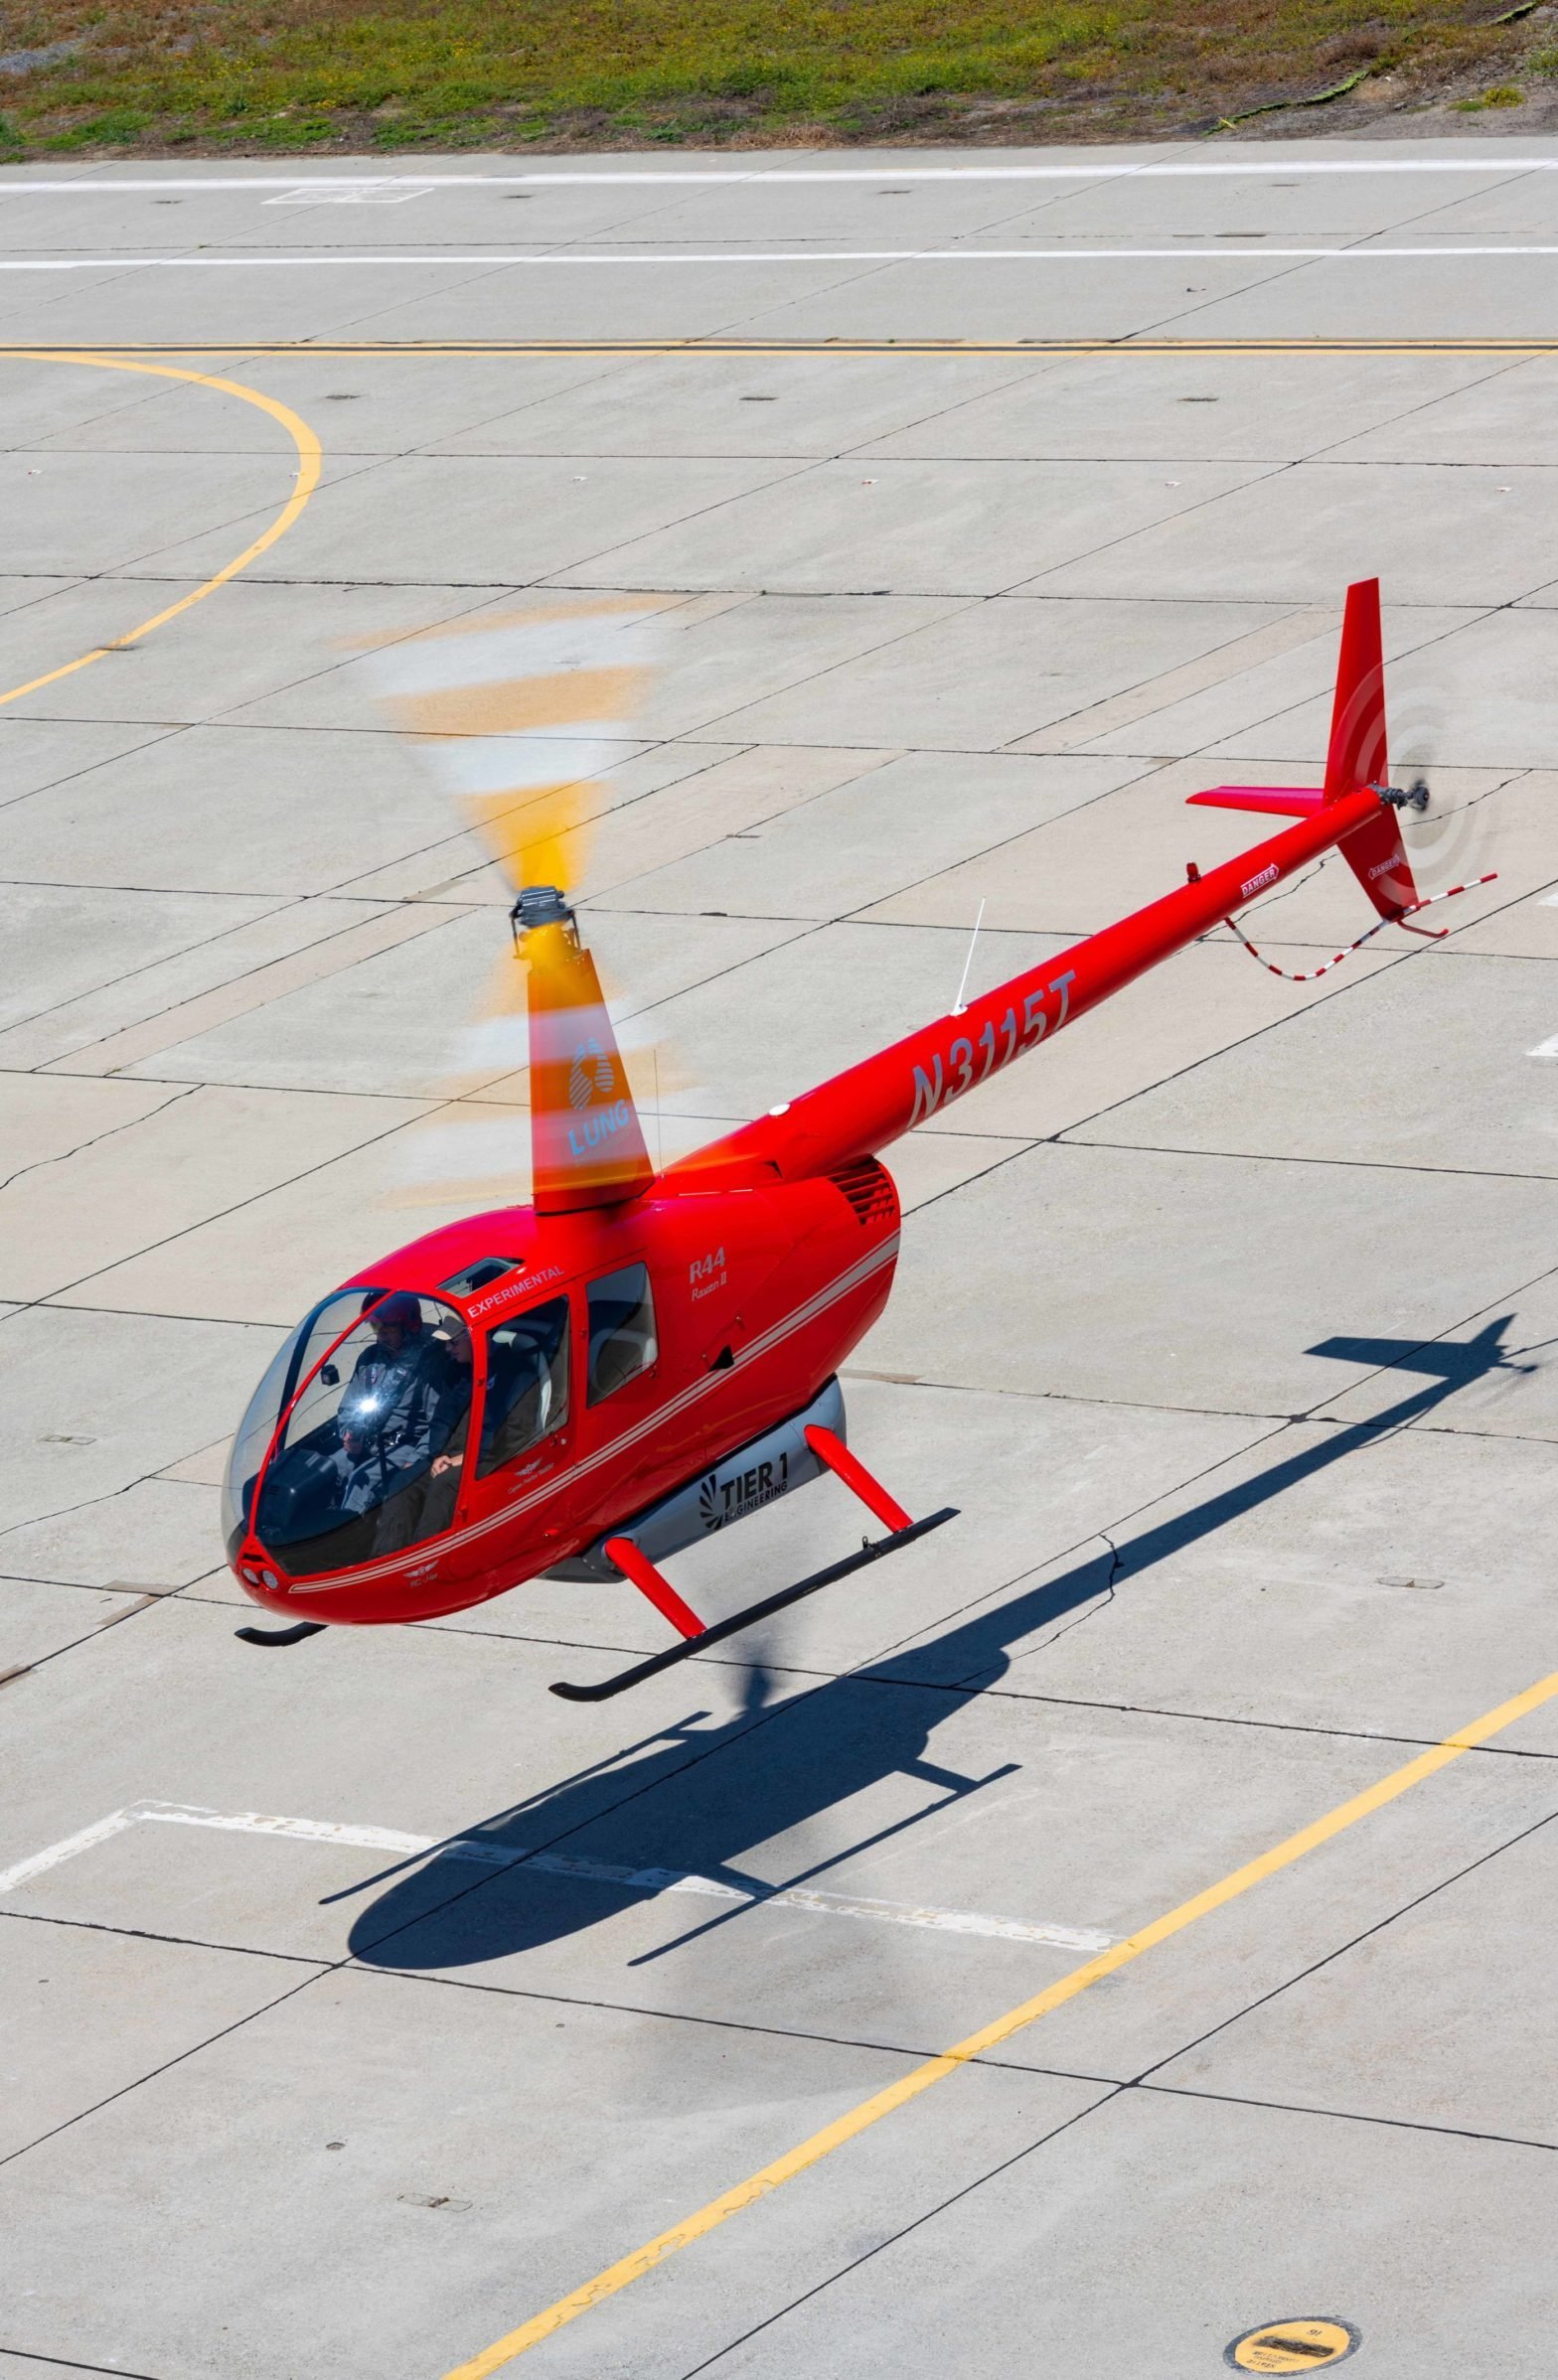 United Therapeutics adds hydrogen to its electric helicopter plans